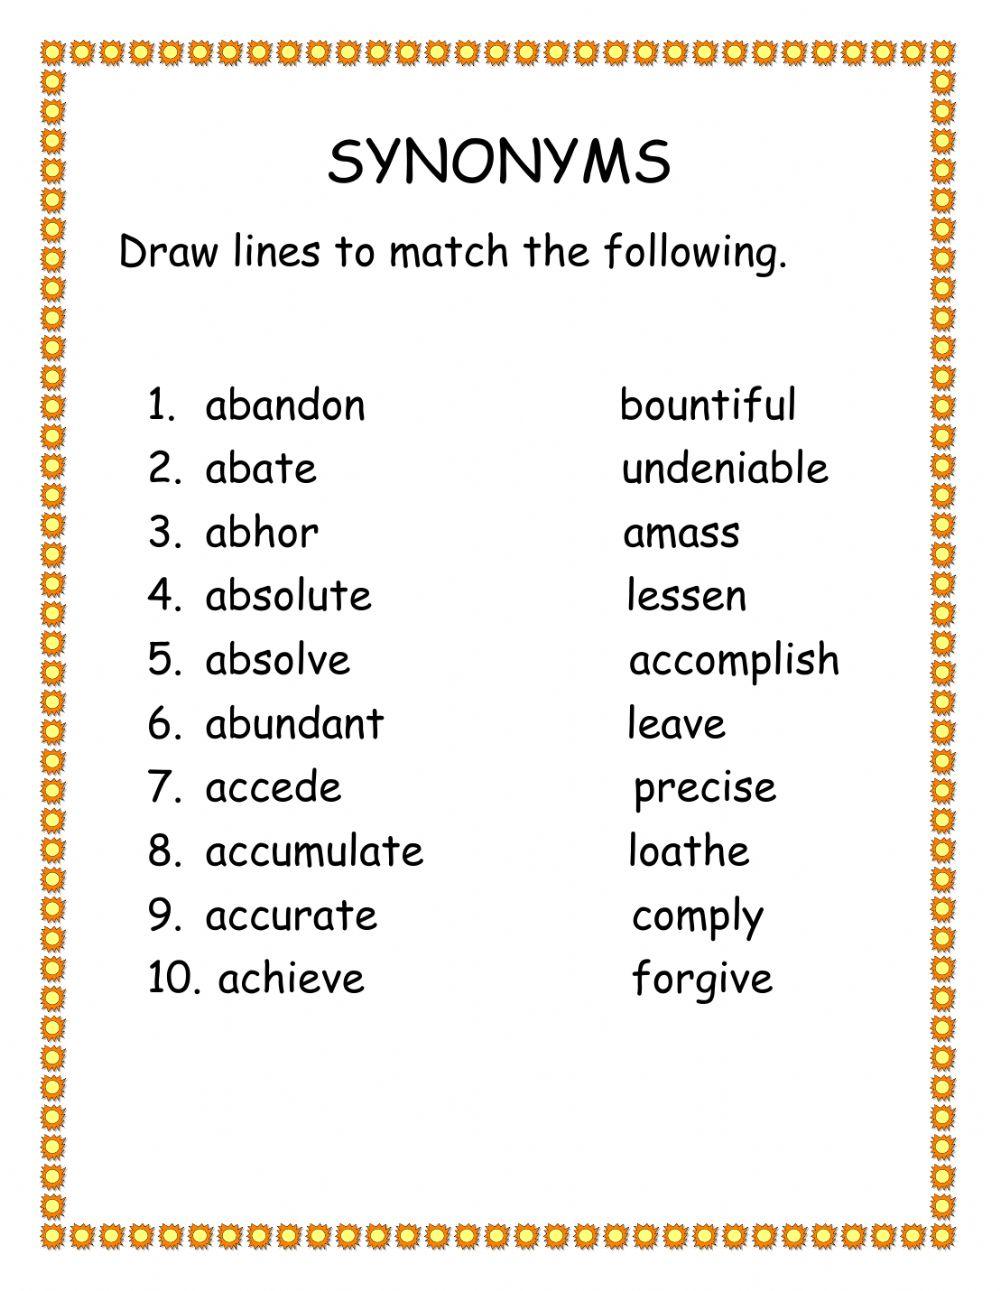 Synonyms